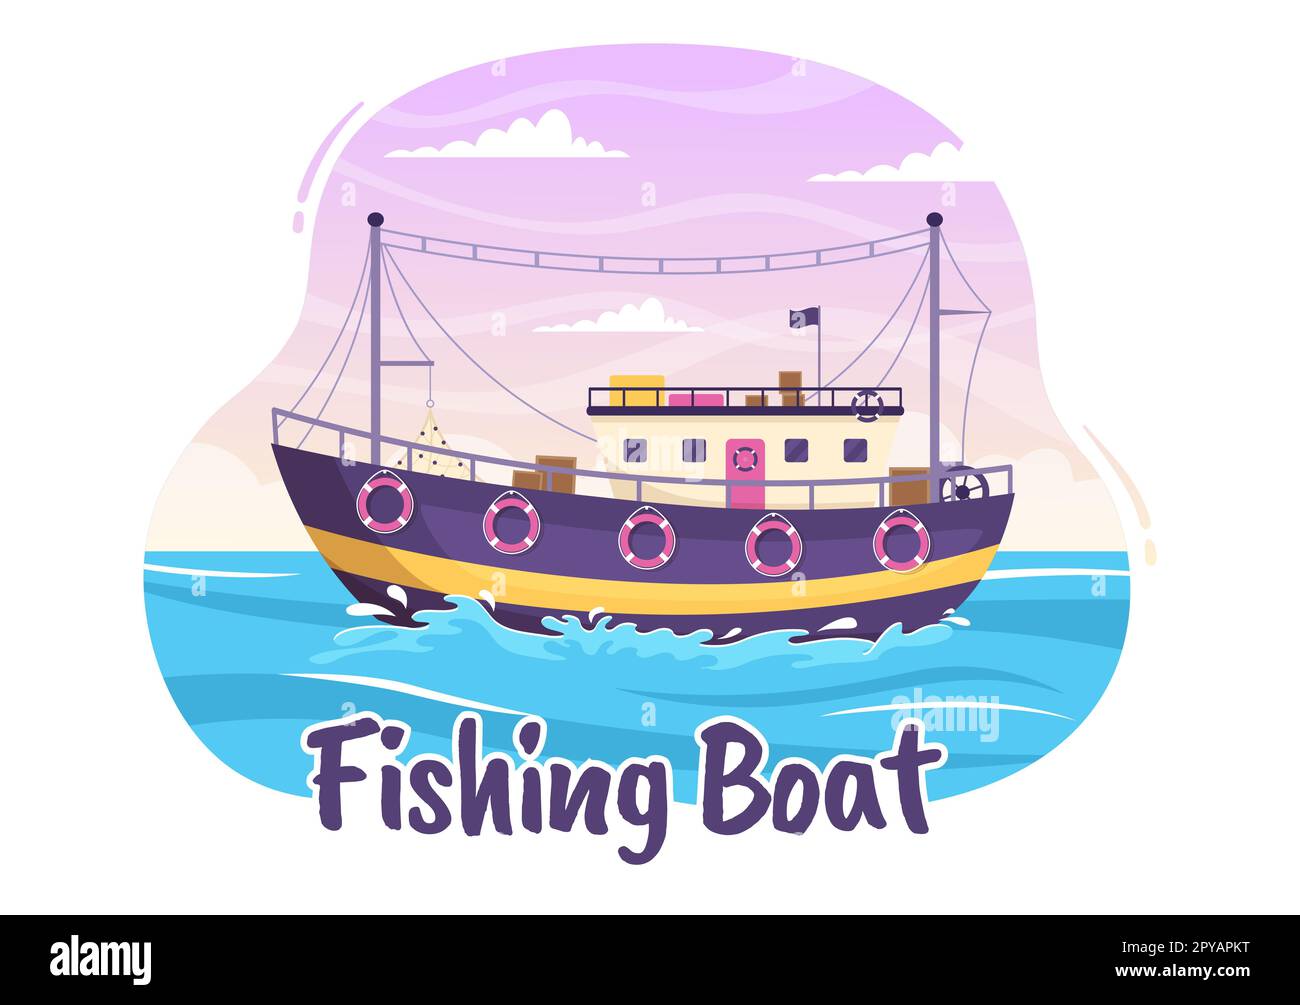 Fishing Boat Illustration with Fishermen Hunting Fish Using Ship for Web Banner or Landing Page in Flat Cartoon Hand Drawn Vector Templates Stock Photo